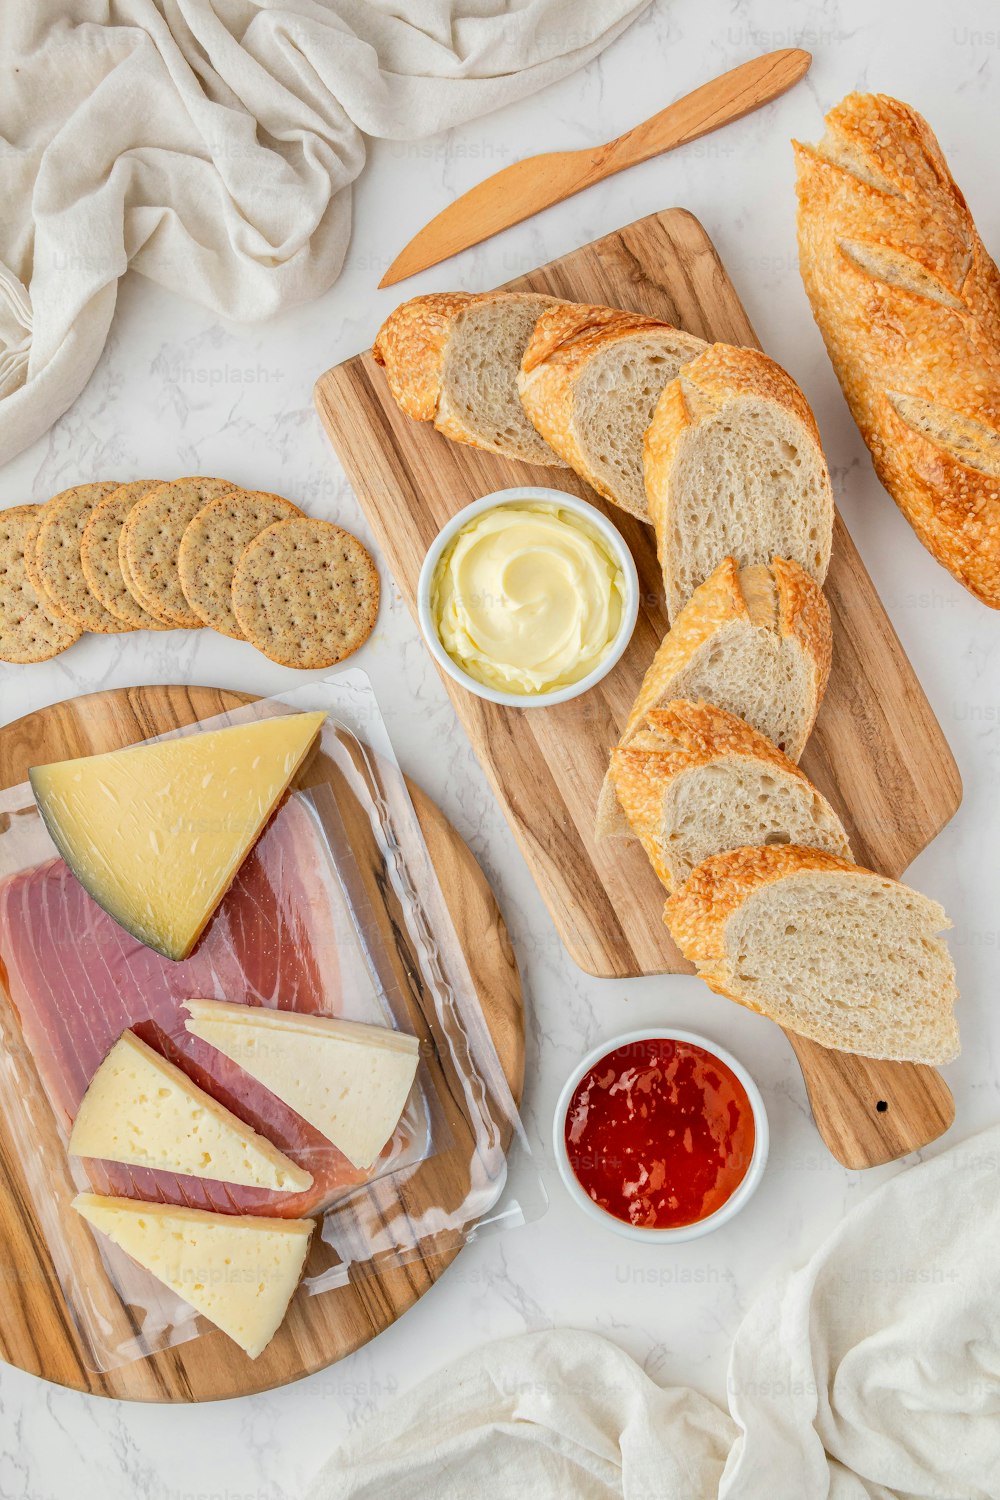 a variety of cheeses, meats, and breads on a cutting board